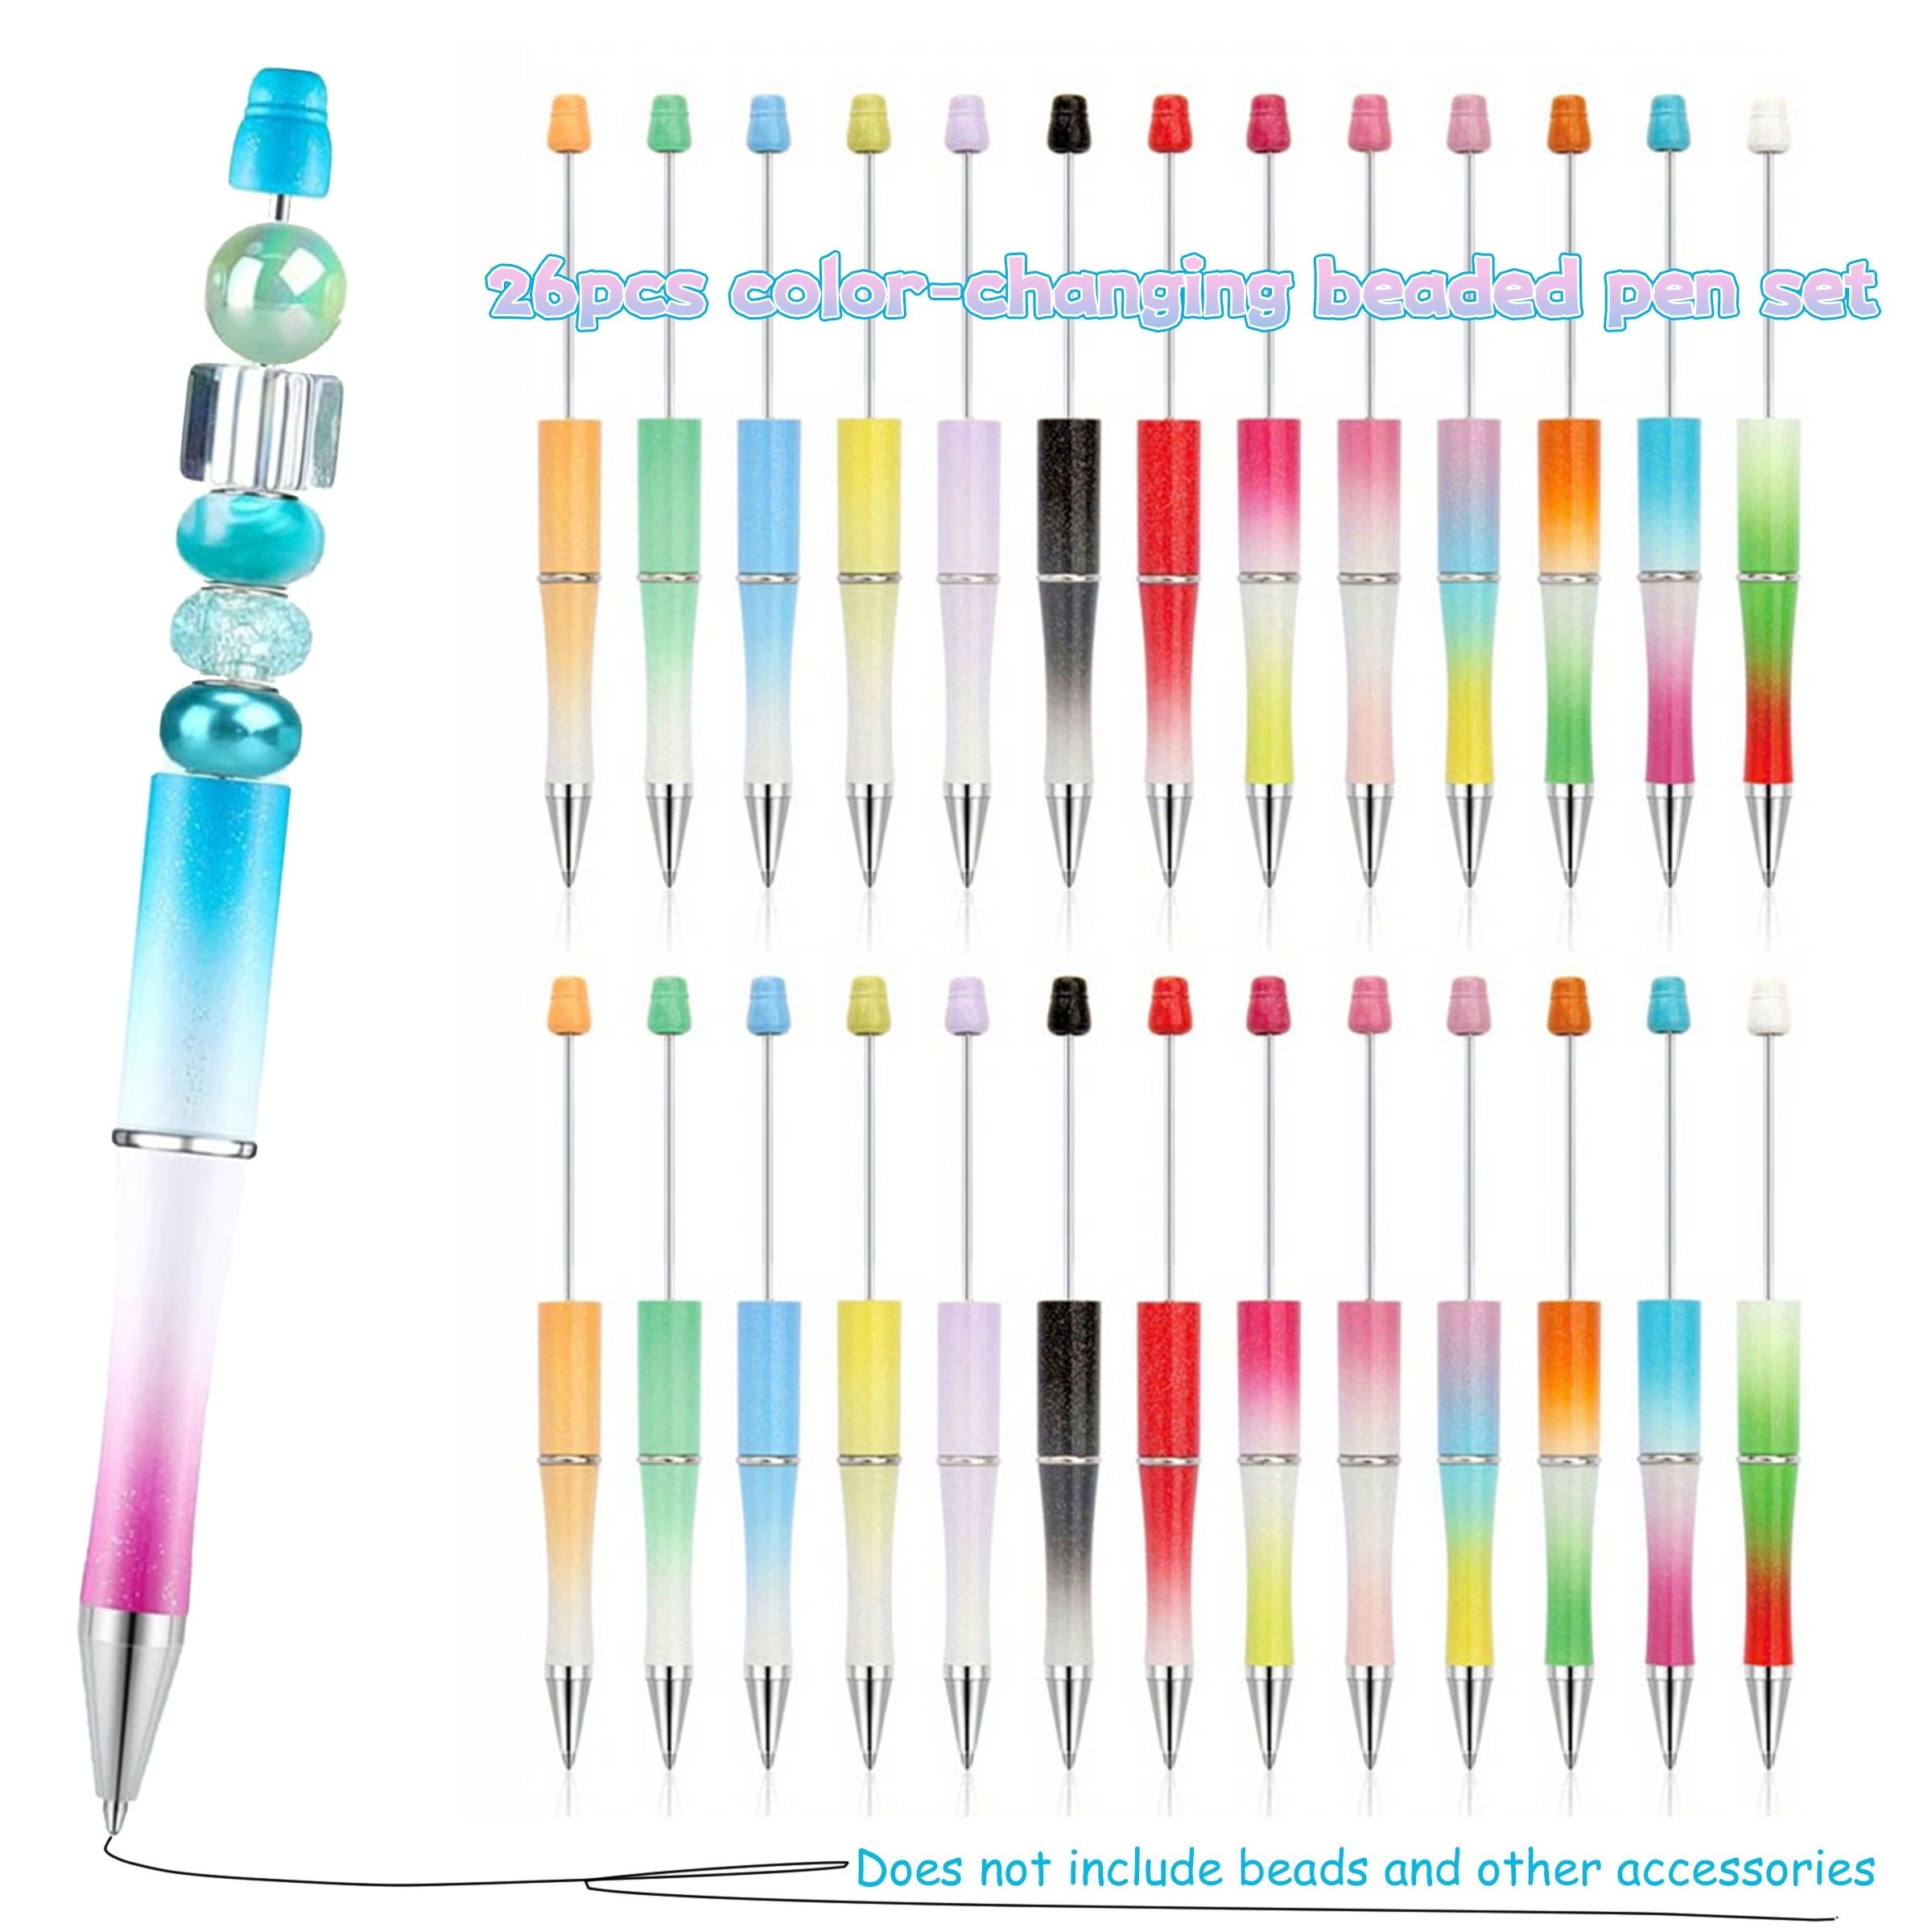 

26pcs Gradient Series Diy Beaded Pen Combination Home Office Signature Pen Fun Gift Diary Gift Pen Birthday Gift Party Gift Without Beading (black Ink)